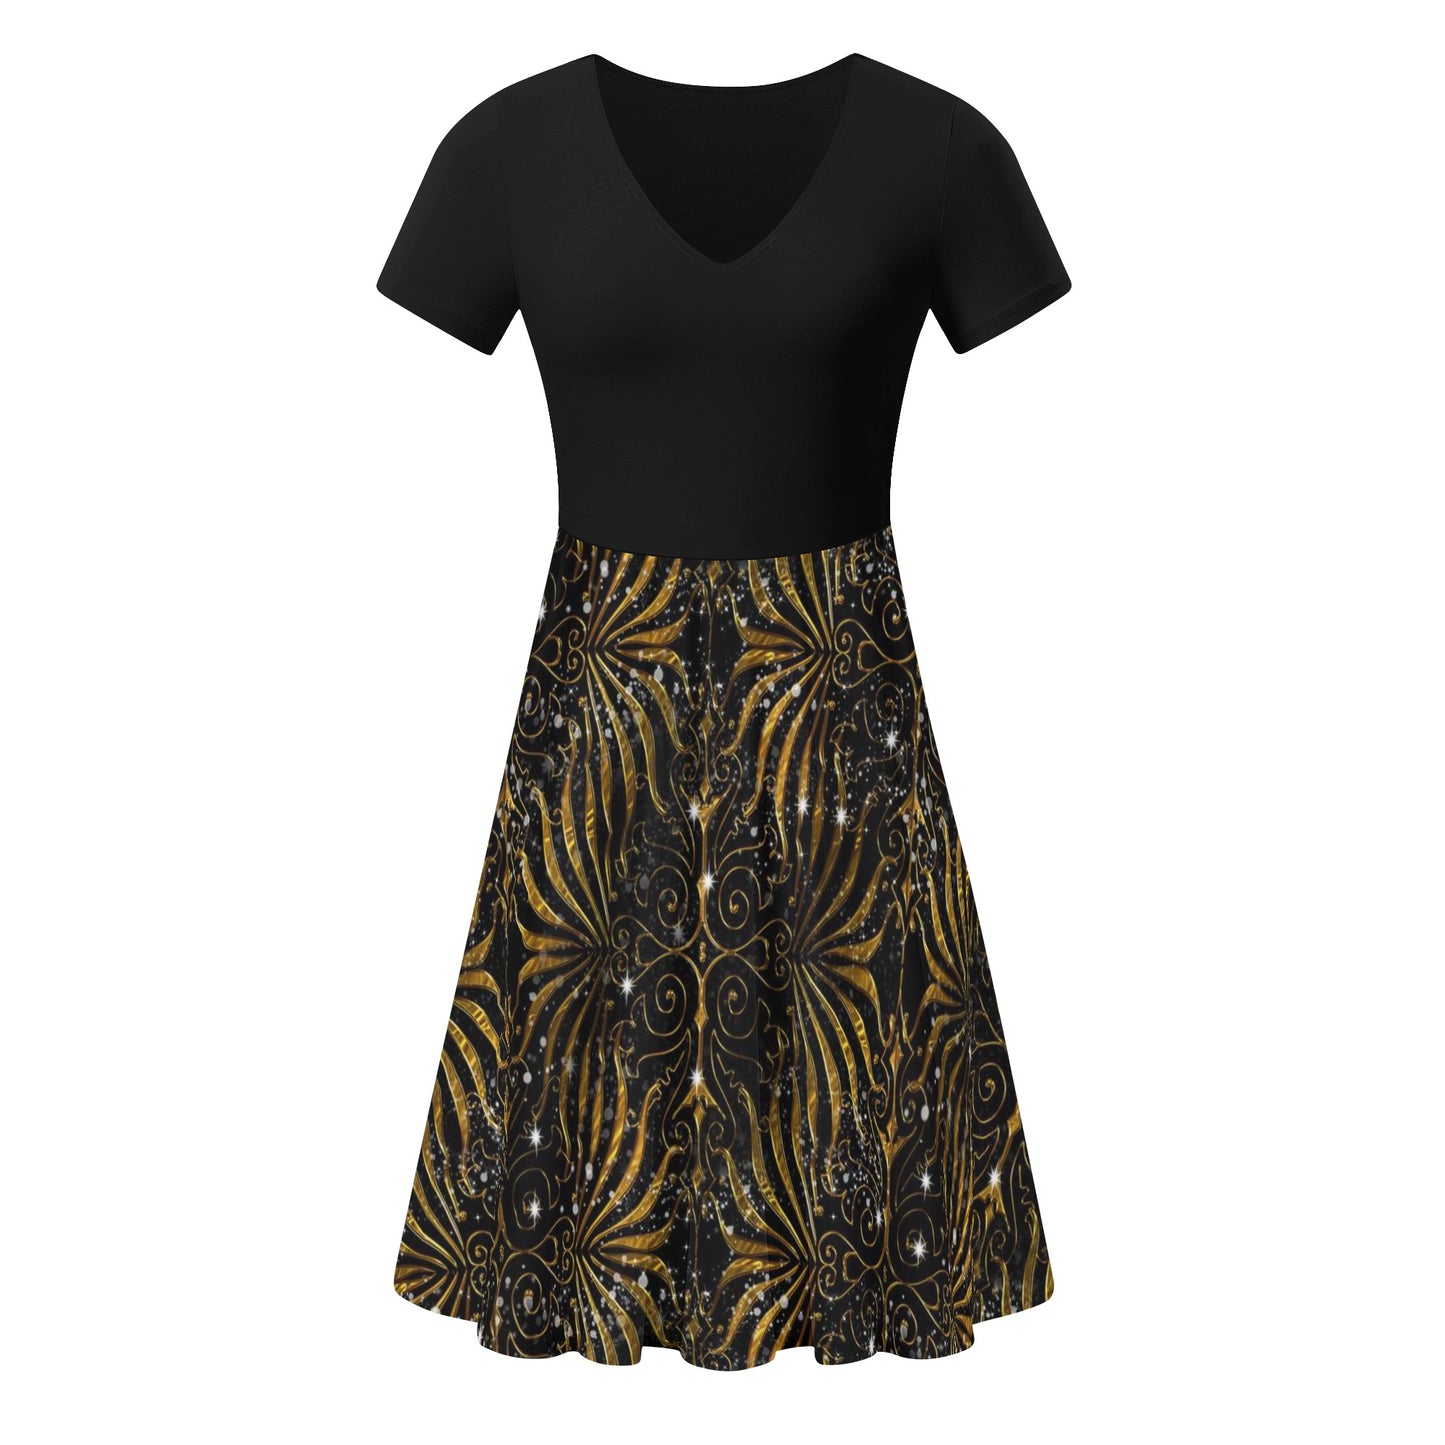 Black and Gold Victorian Sparkle Womens Black Ruffle Summer Dress